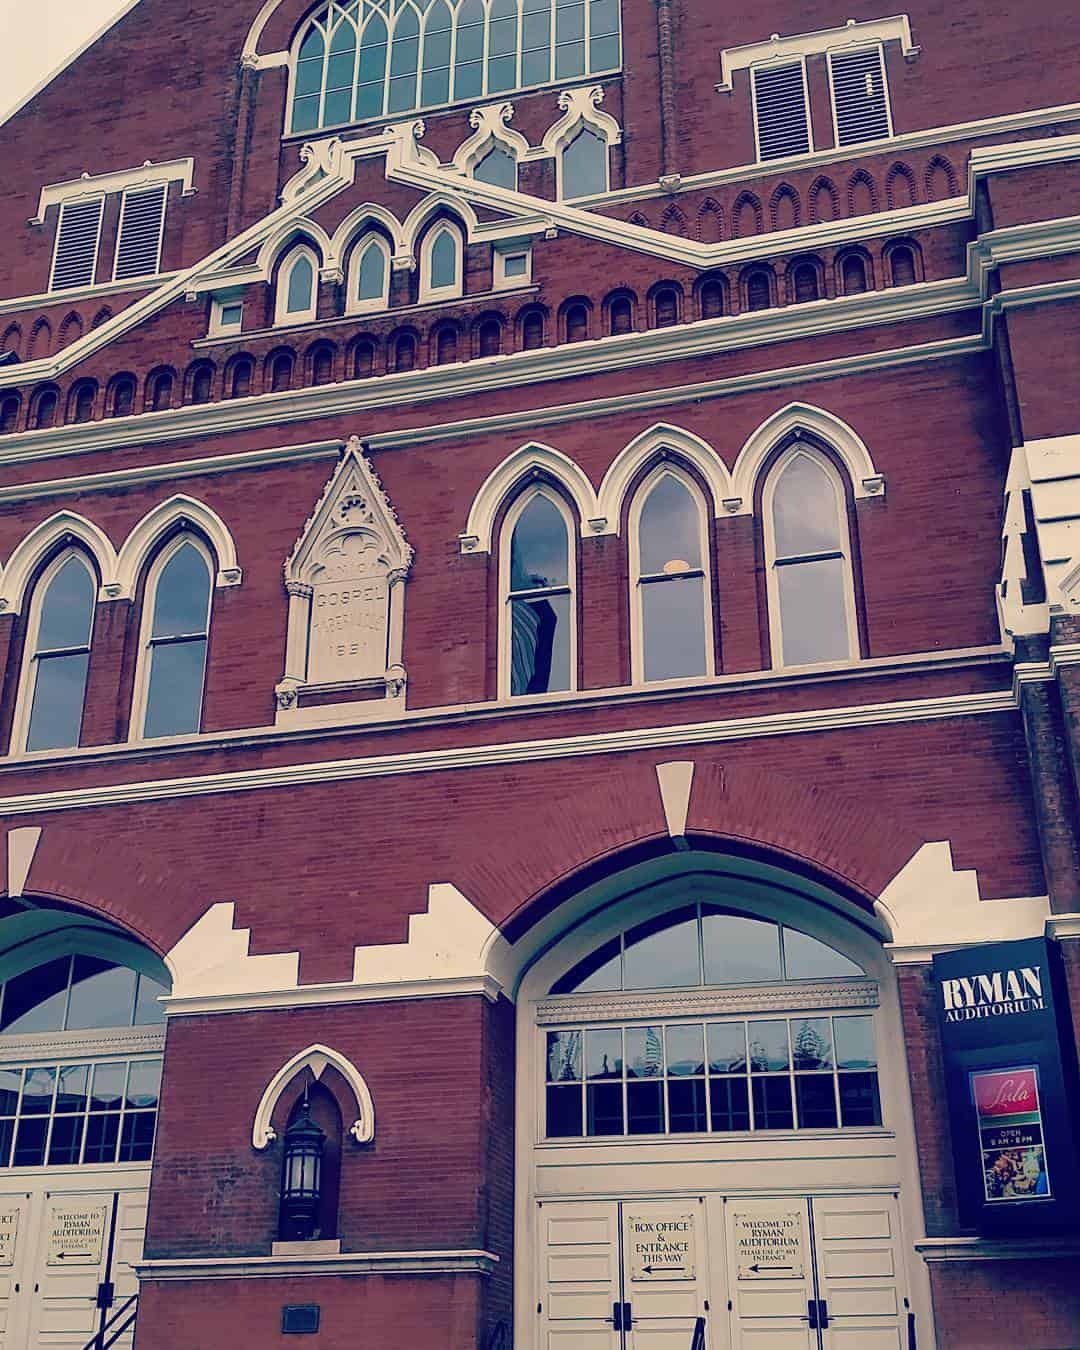 The facade of the famous Ryman Auditorium in Nashville, Tennessee